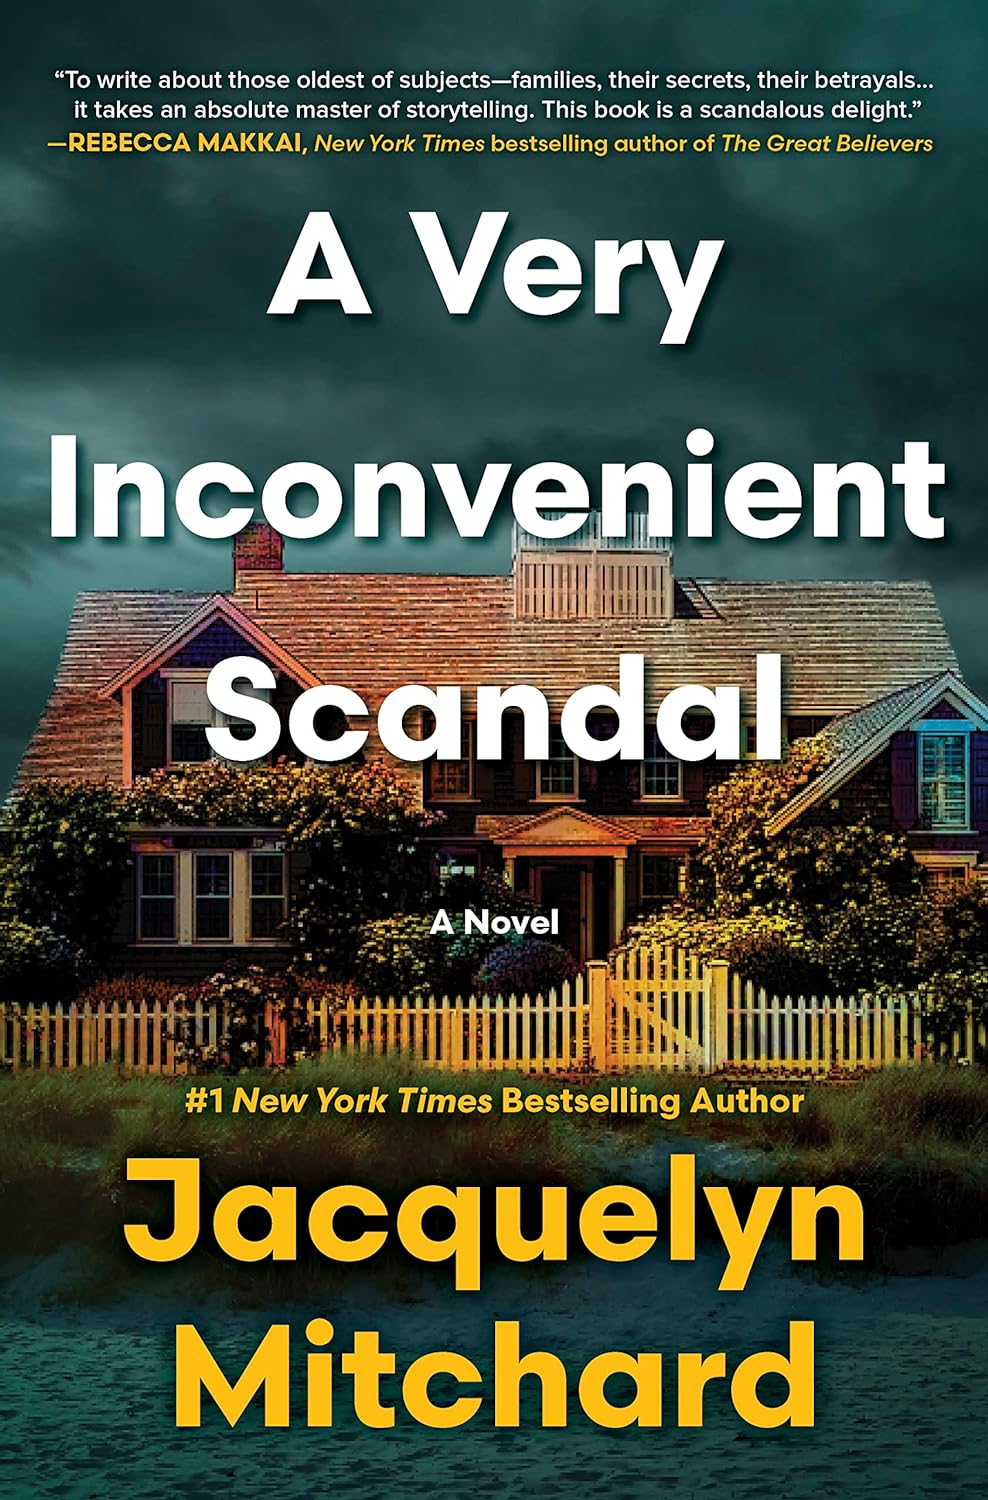 Image for "A Very Inconvenient Scandal"